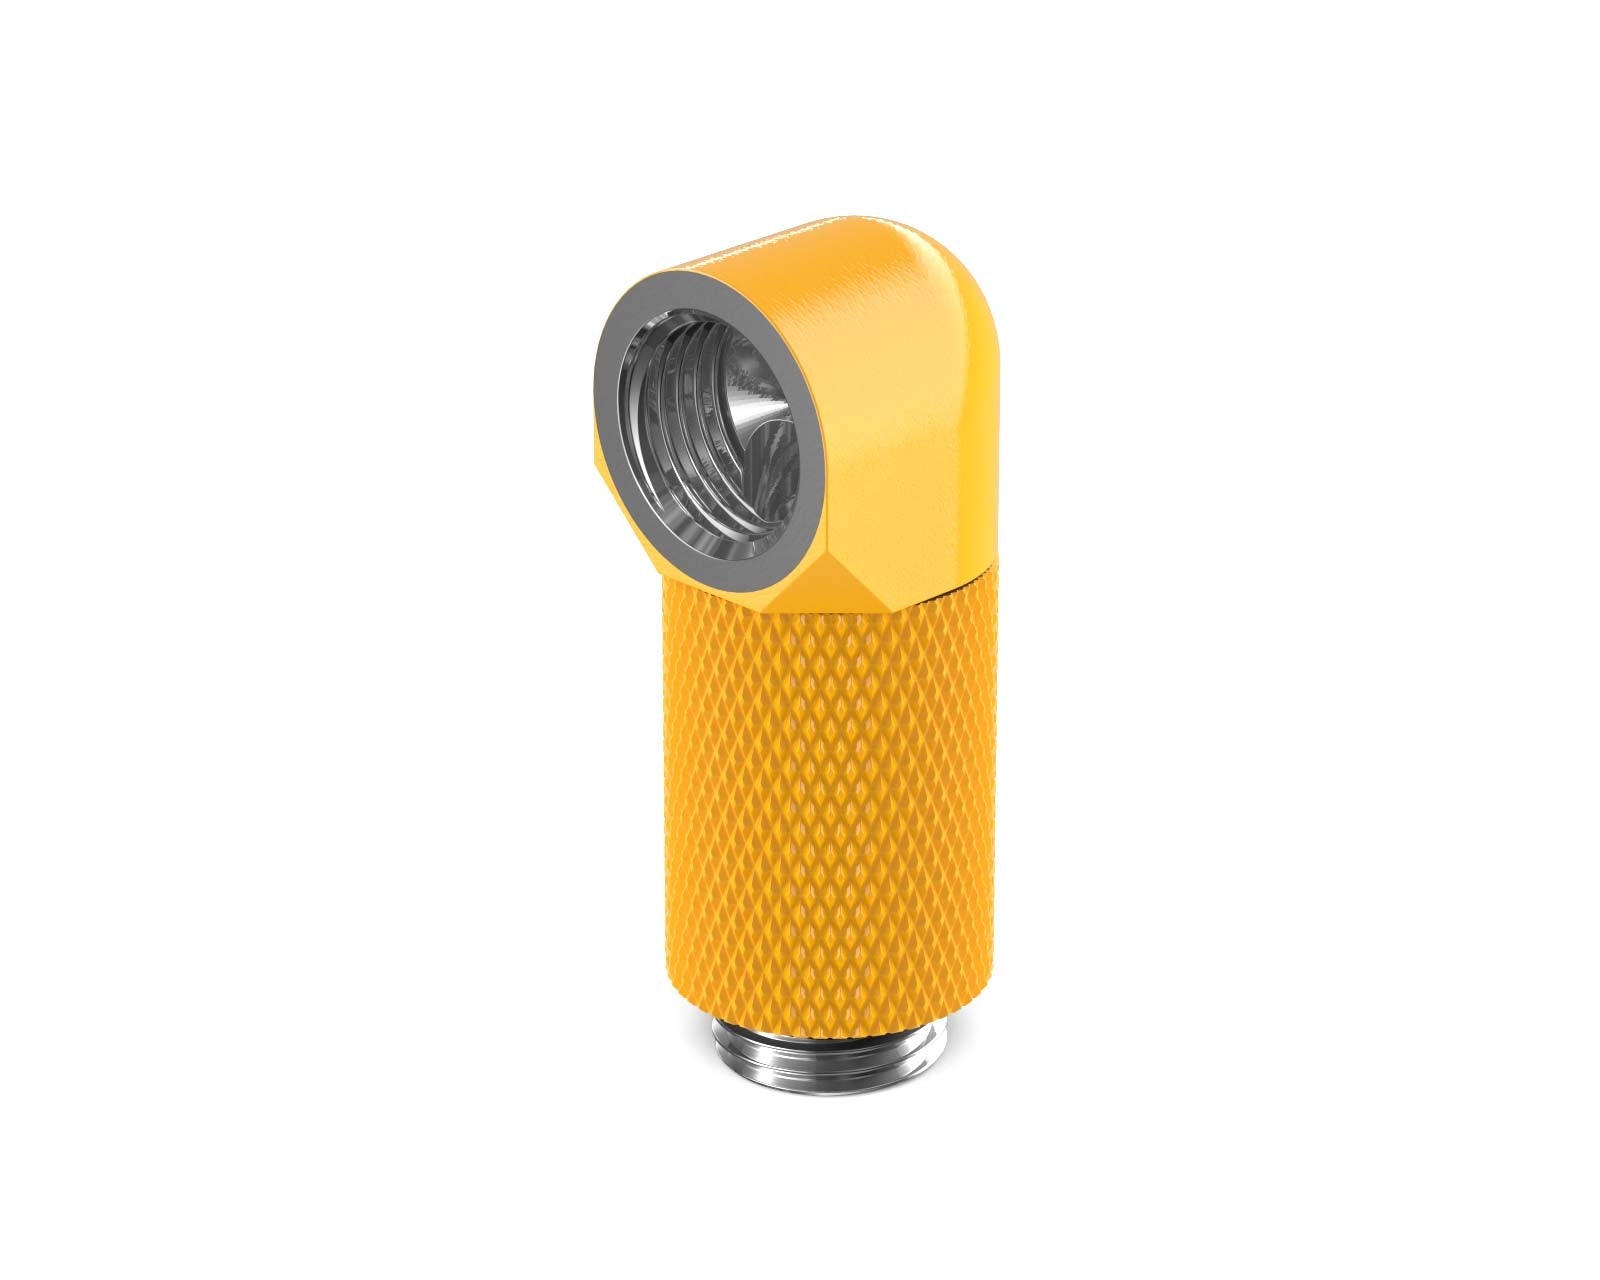 PrimoChill Male to Female G 1/4in. 90 Degree SX Rotary 25mm Extension Elbow Fitting - PrimoChill - KEEPING IT COOL Yellow